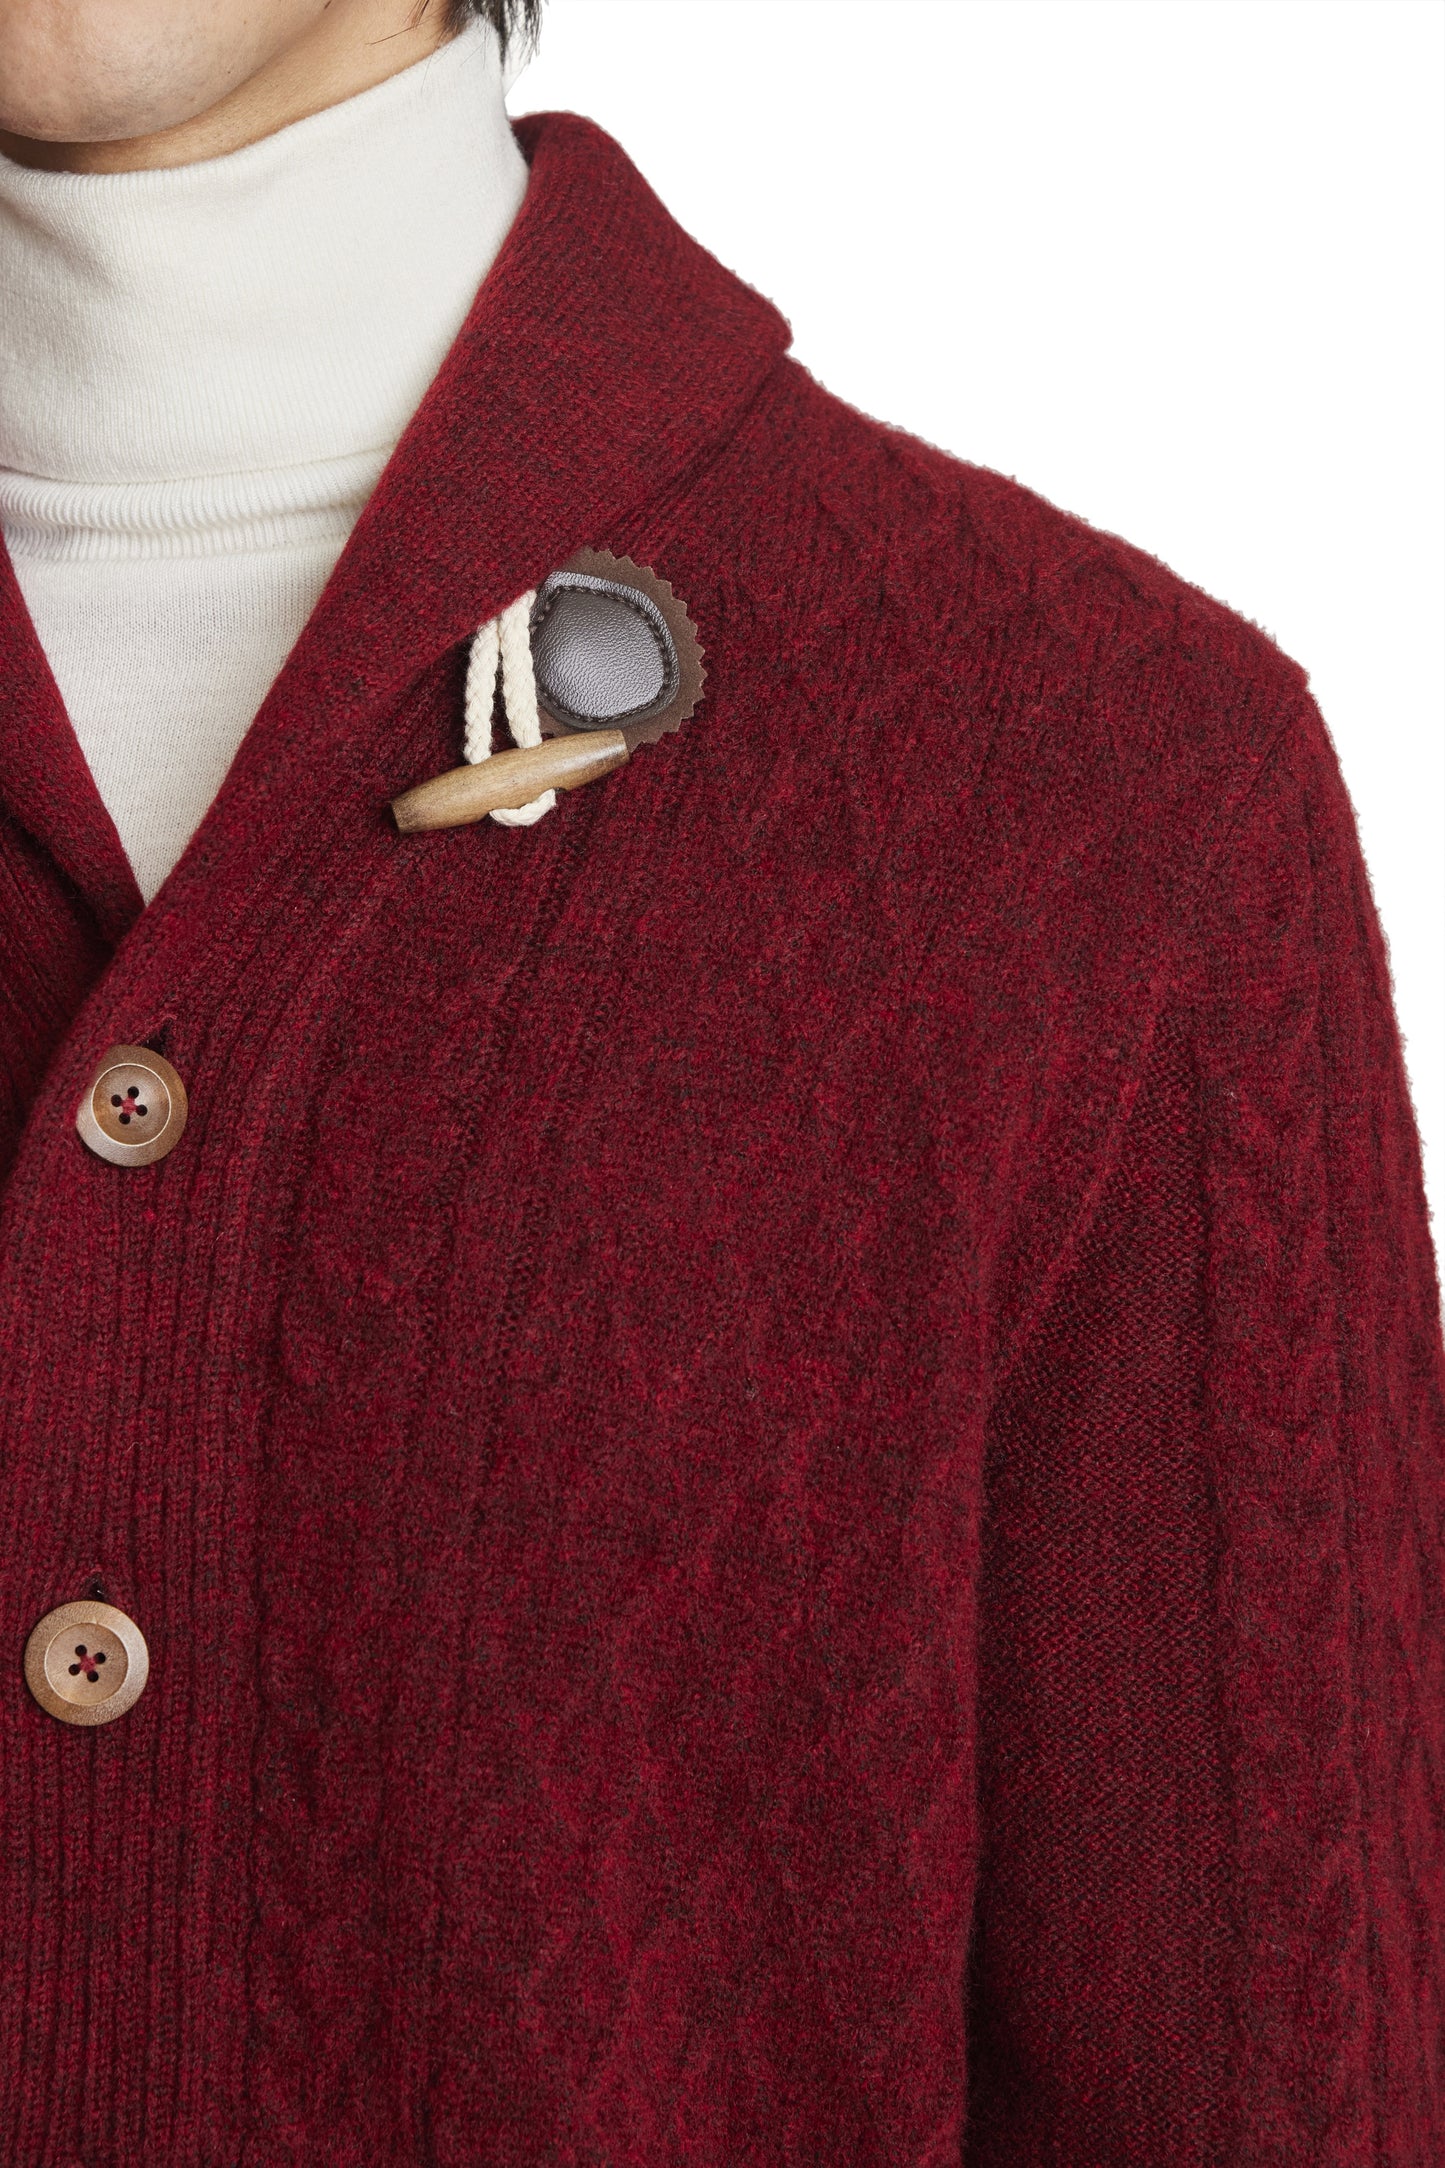 Paisely & Gray Wine Toggle Cardigan Sweater